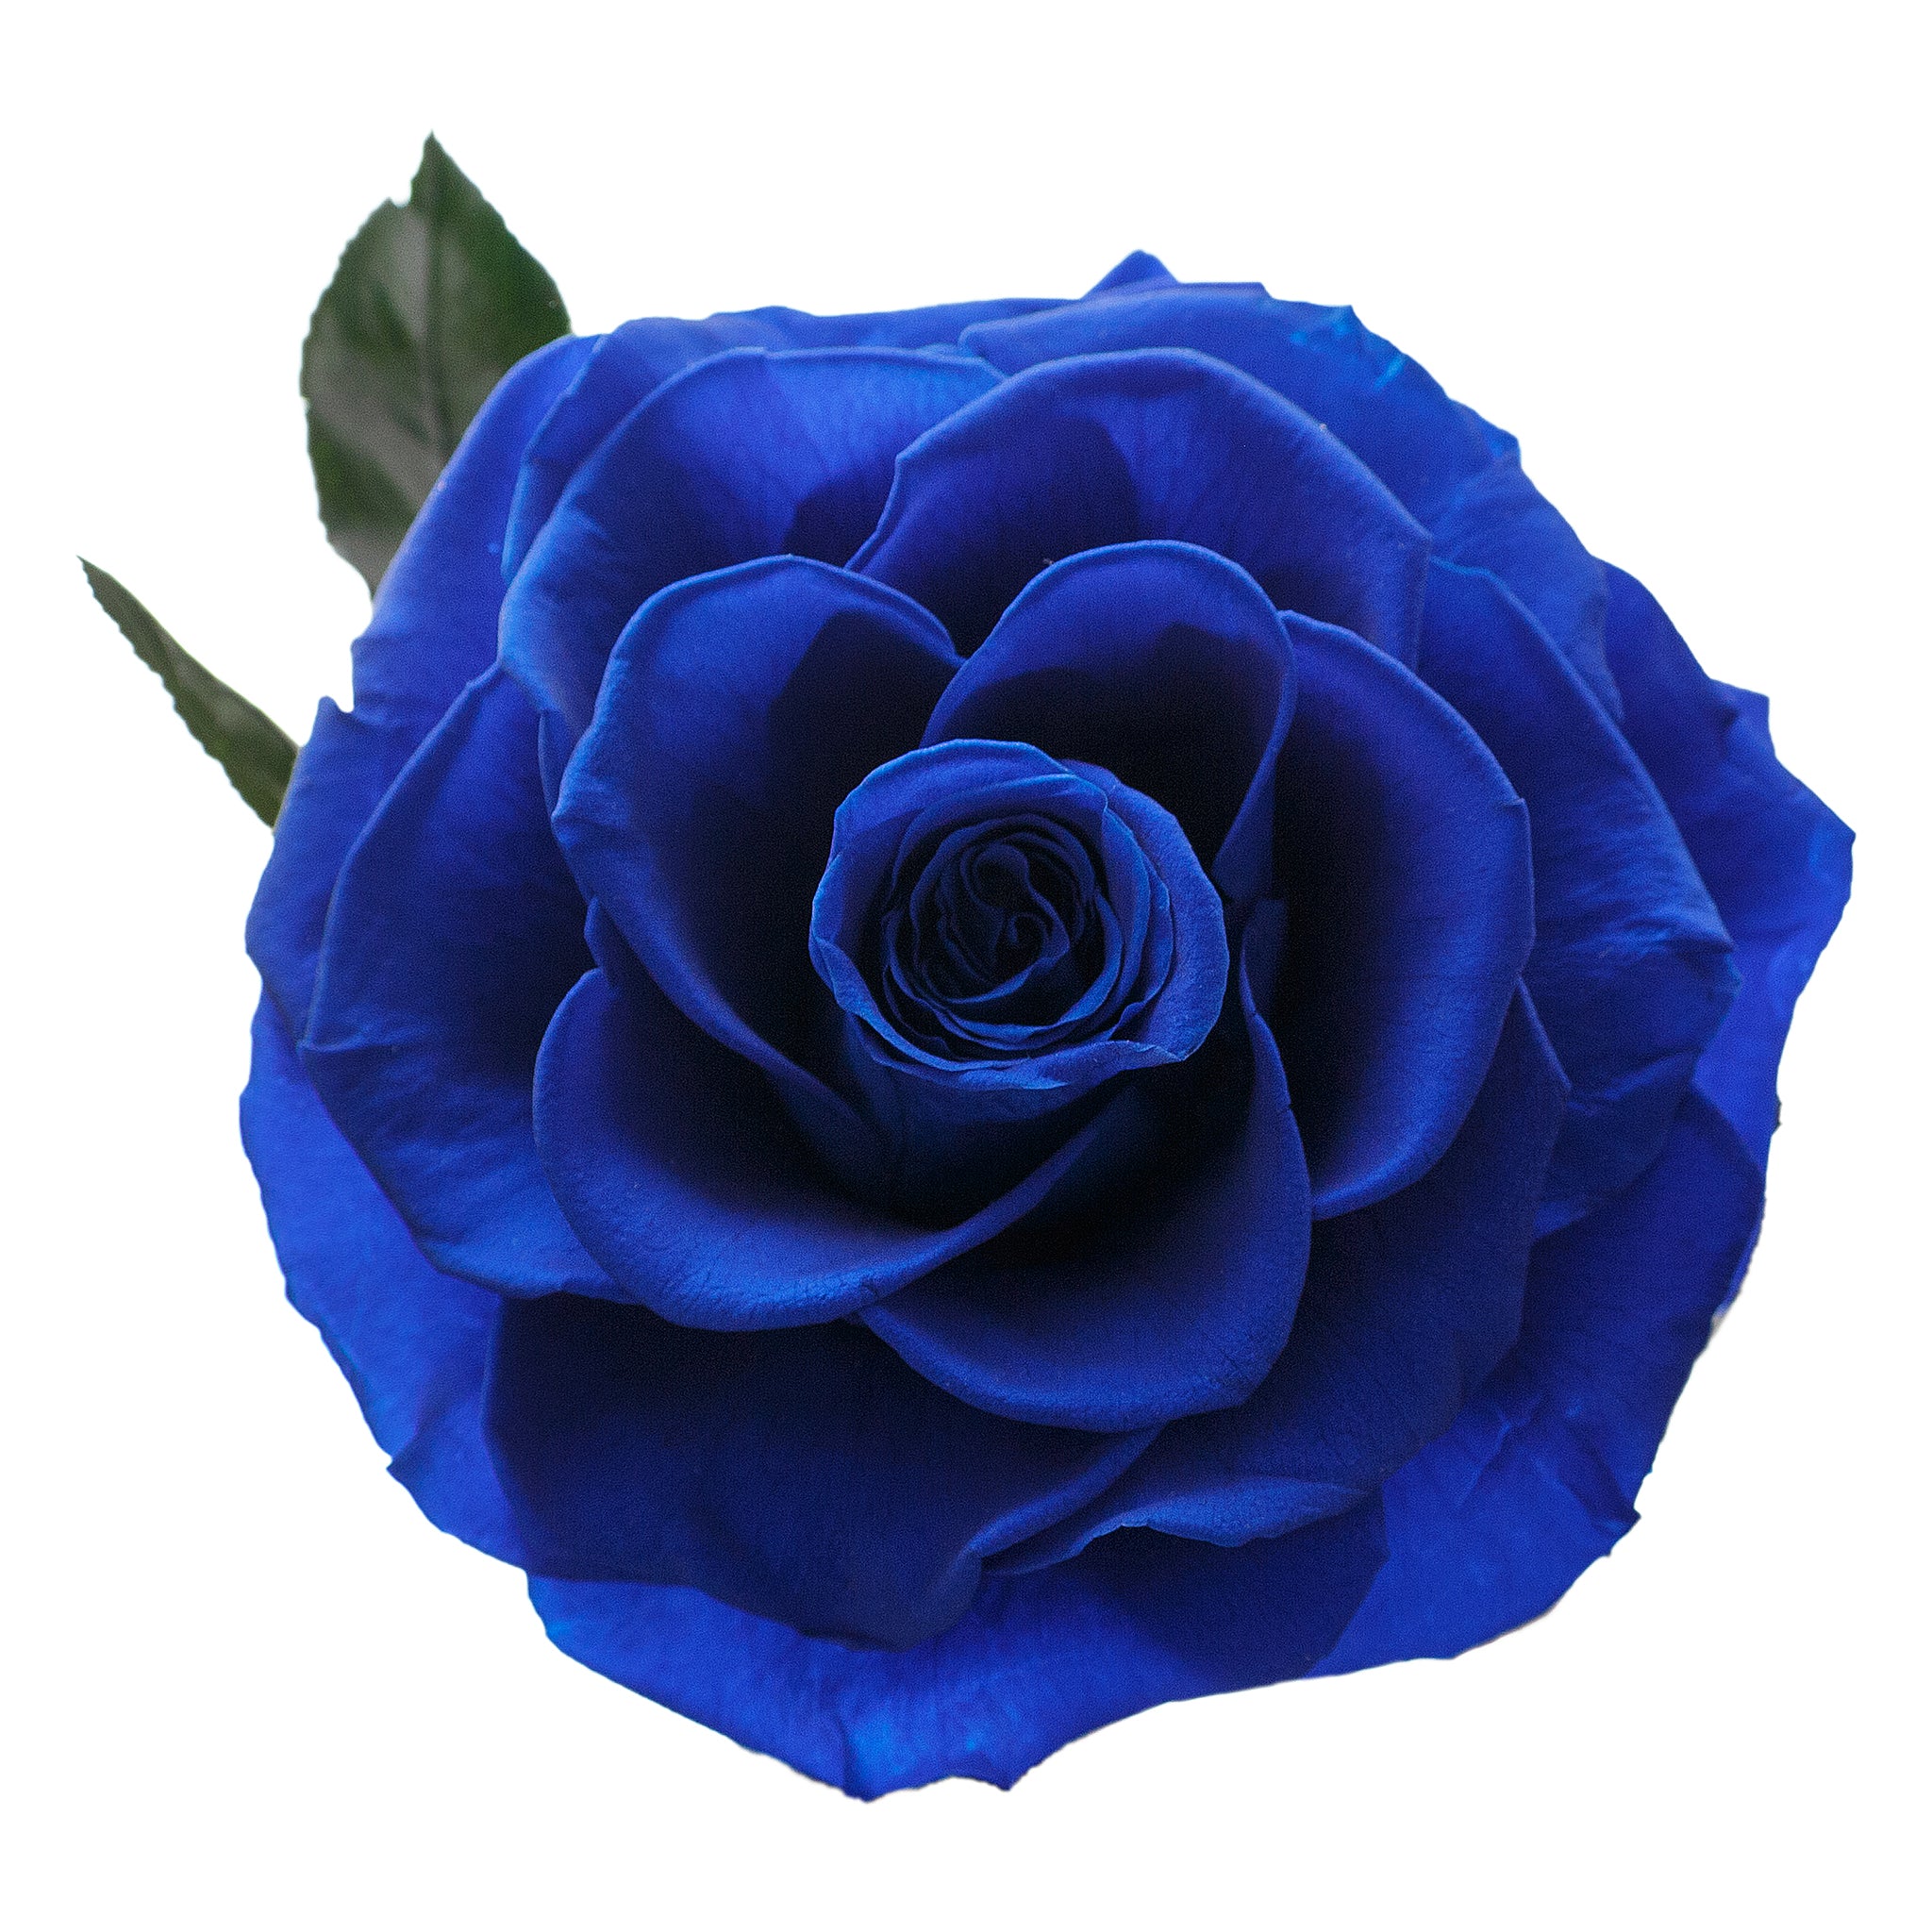 Medium Royal Blue Infinity Rose in Glass Dome